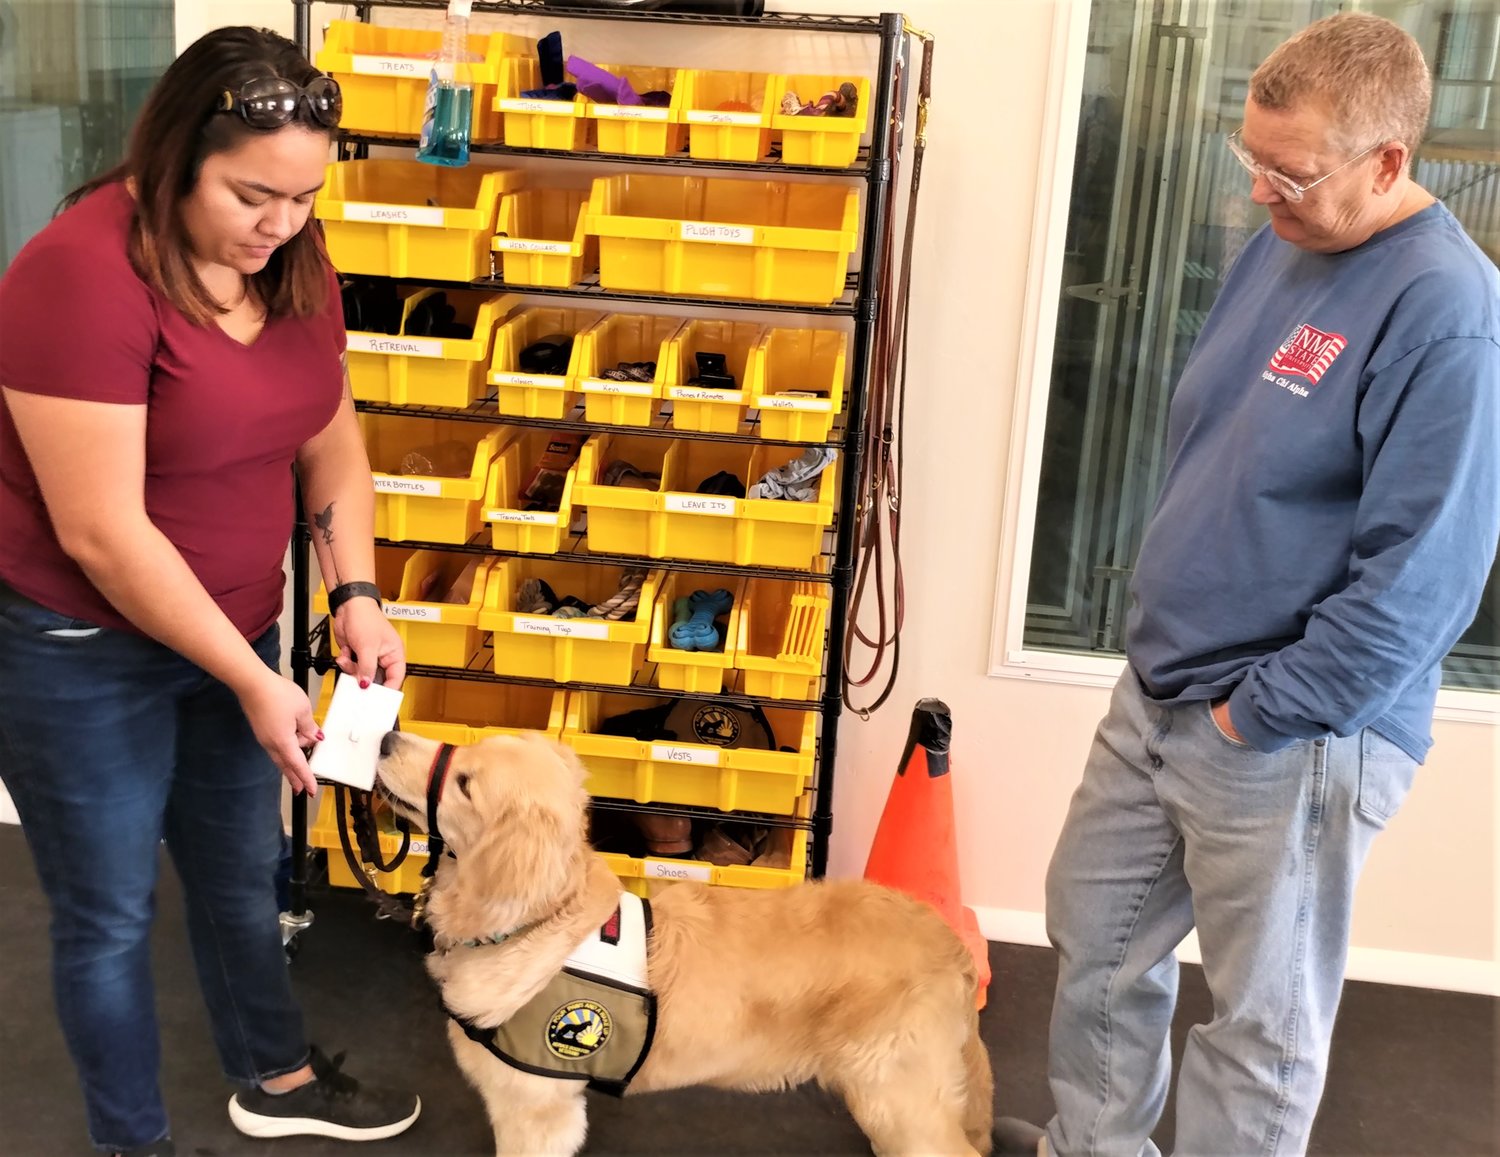 As Four Paws and a Wake Up, Inc. owner Andrea Joseph looks on, trainer Aly De La O helps CB get to know what a light switch feels and smells like. The large windows in back will allow dogs in kennels to watch and learn as other dogs are trained.